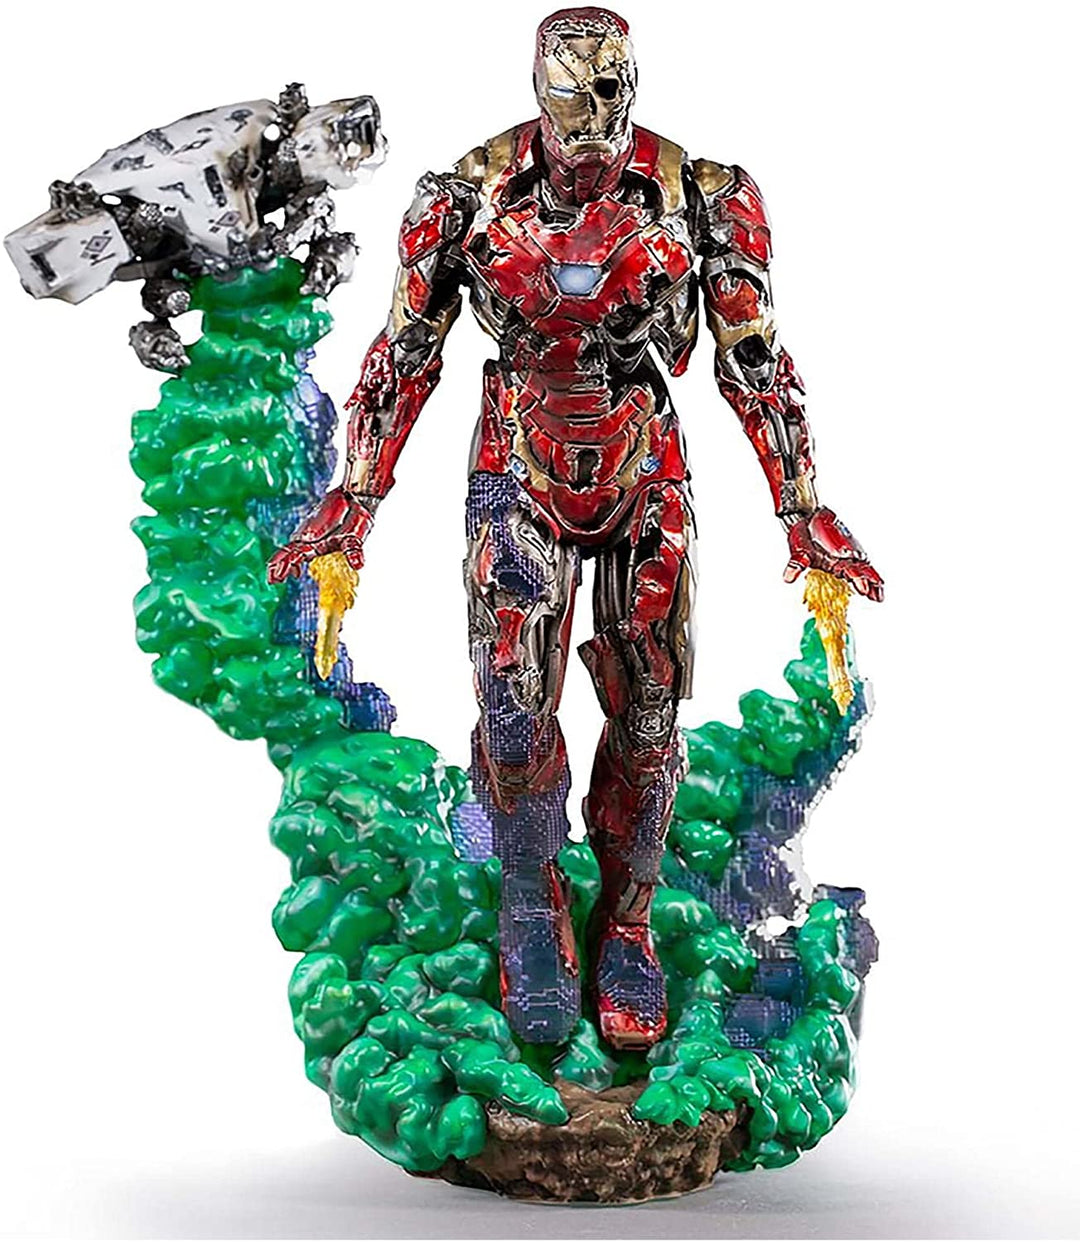 Iron Studios 30920-10 Spider Far from Home BDS Art Scale Deluxe 1/10 Iron Man Il